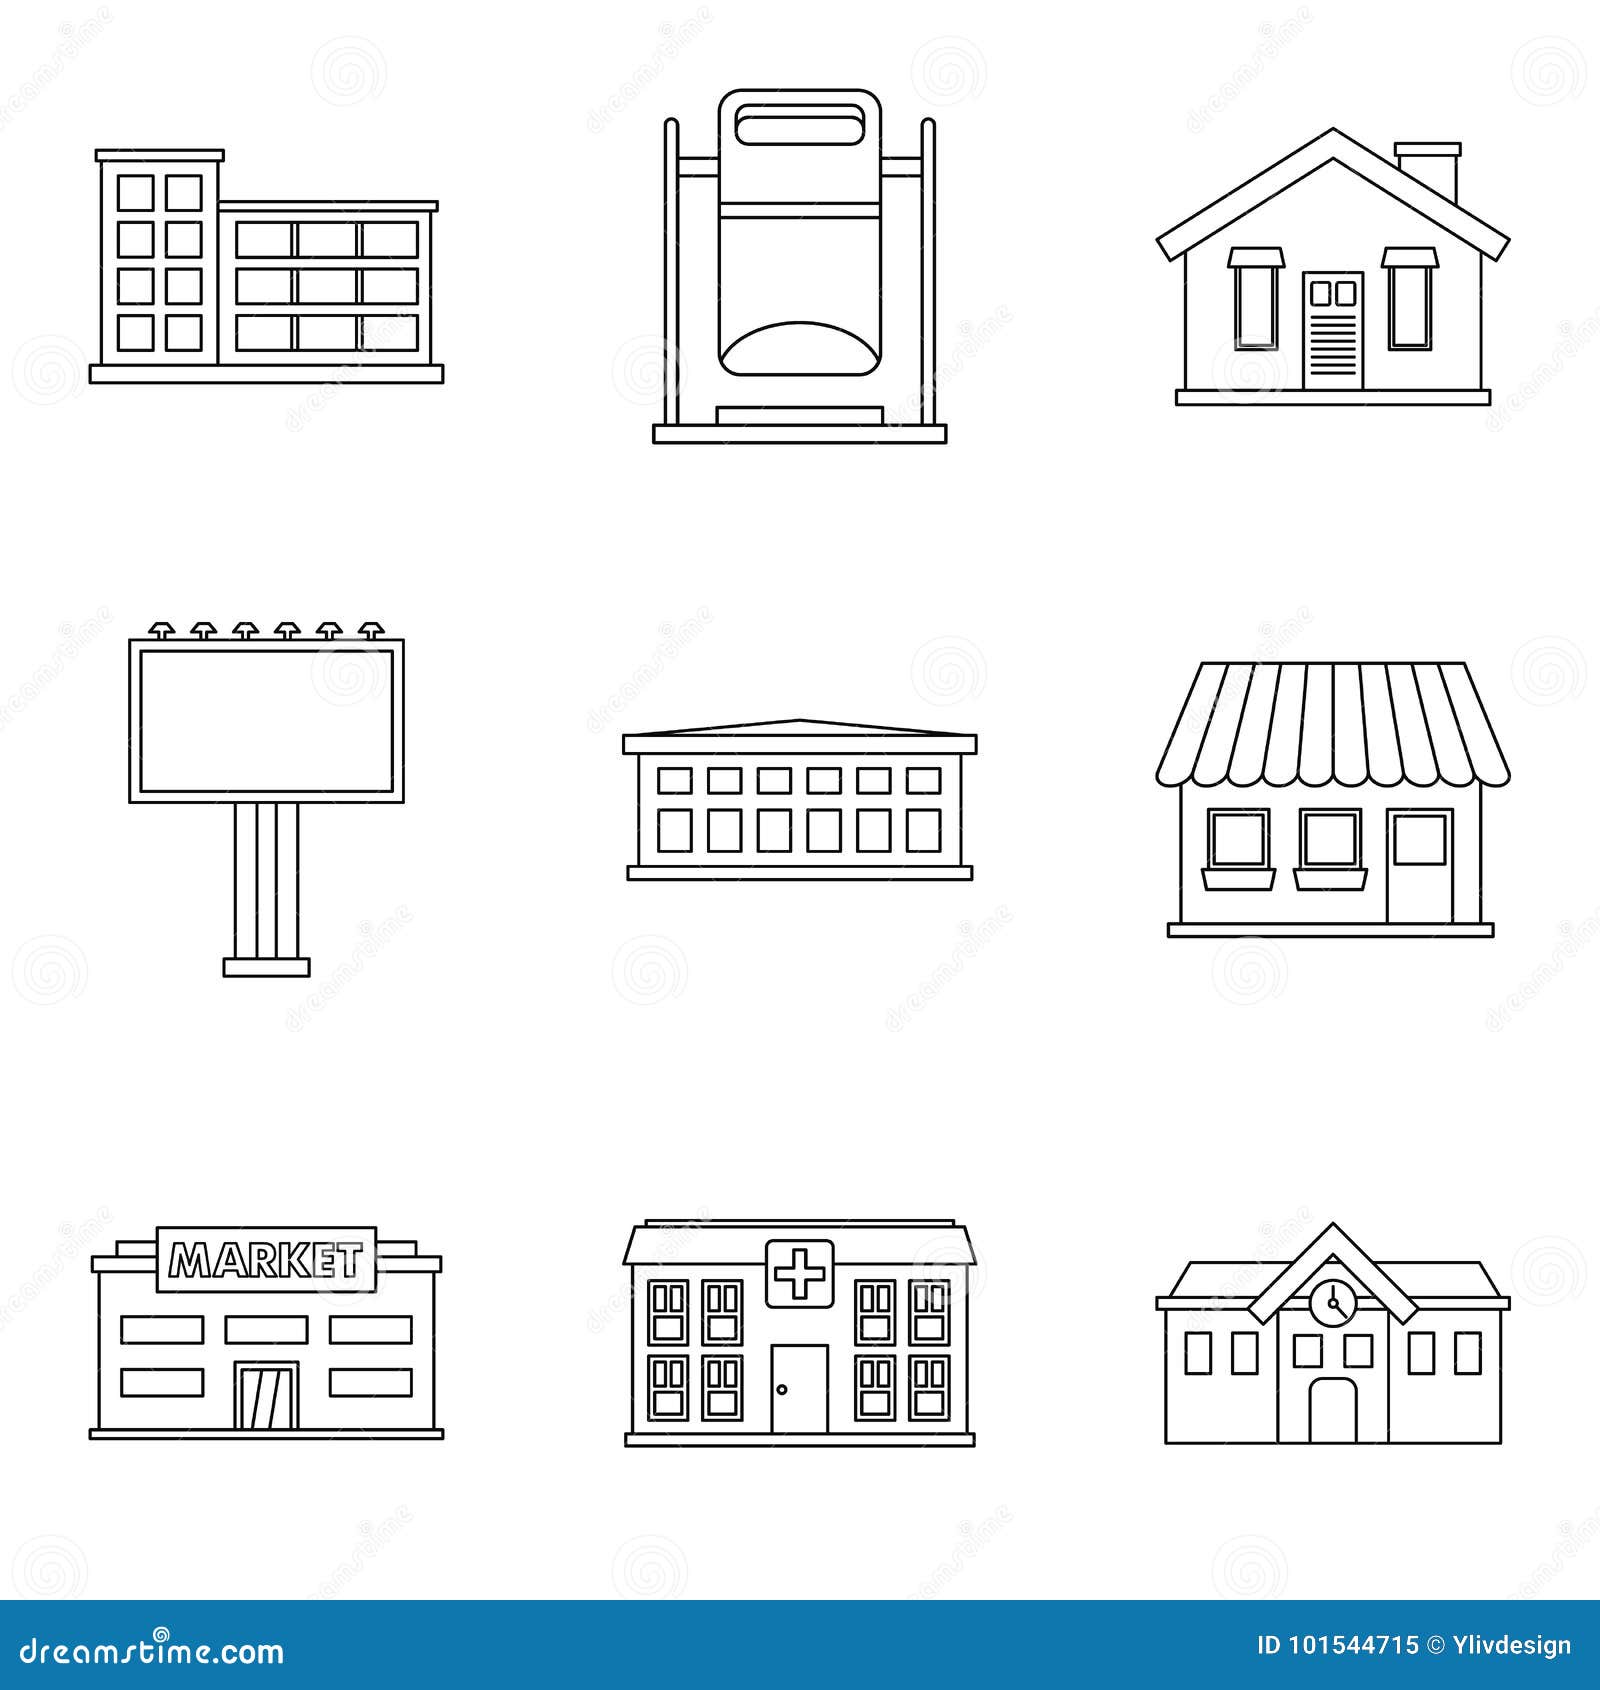 9259 Small Building Sketch Images Stock Photos  Vectors  Shutterstock